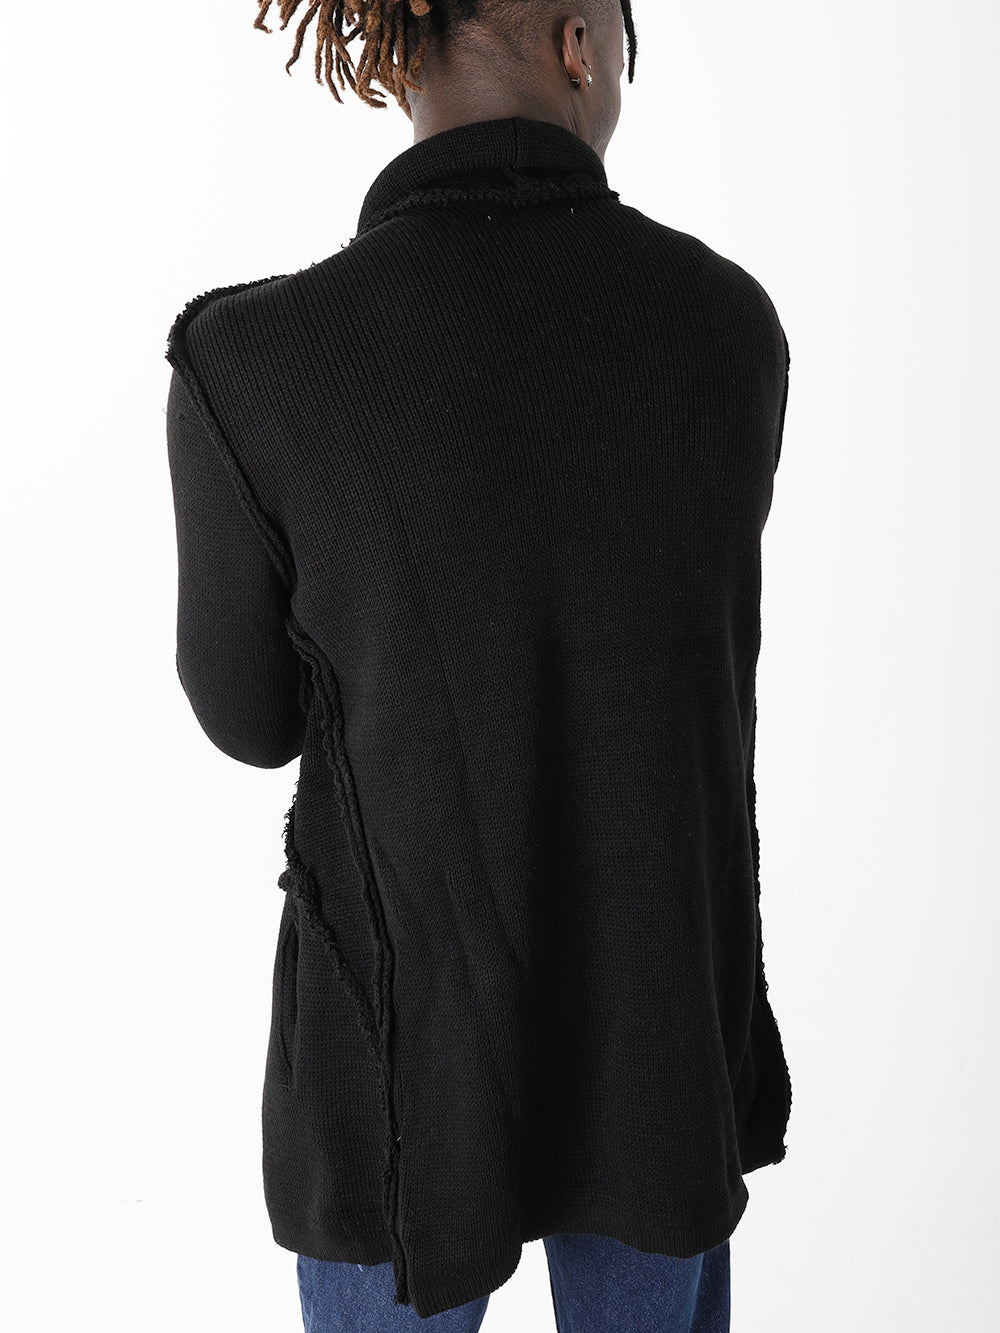 The back of a man wearing HOODED DISTRESSED CARDIGAN // BLACK skinny fit jeans and a black sweater.